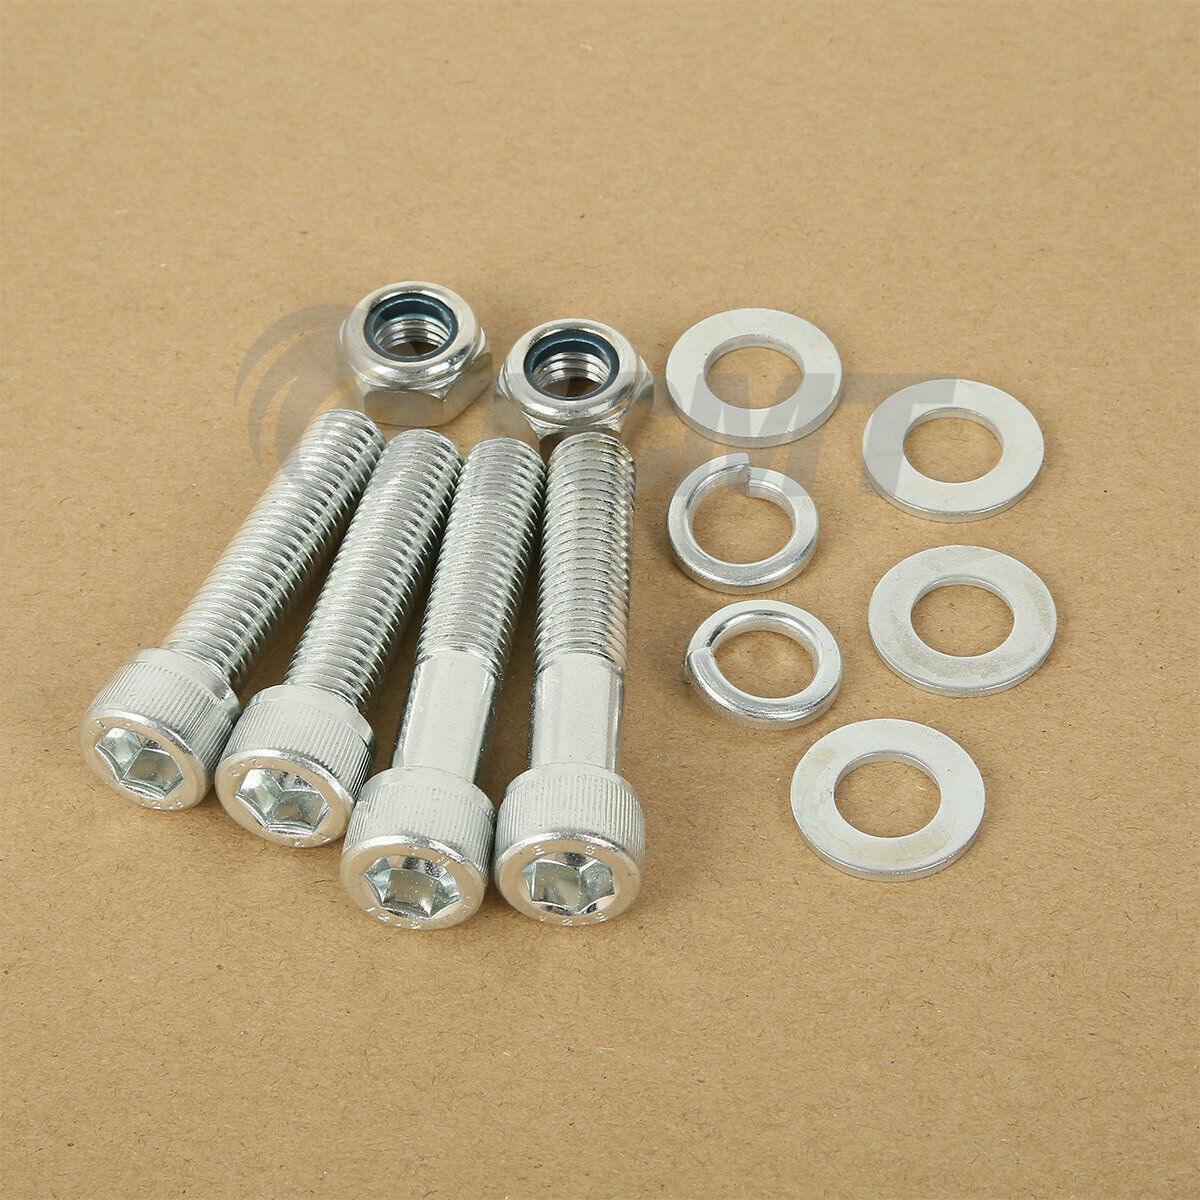 1" Chrome Shock Lowering Kit For Harley VROD V-Rod Night Rod Special Street Rod - Moto Life Products